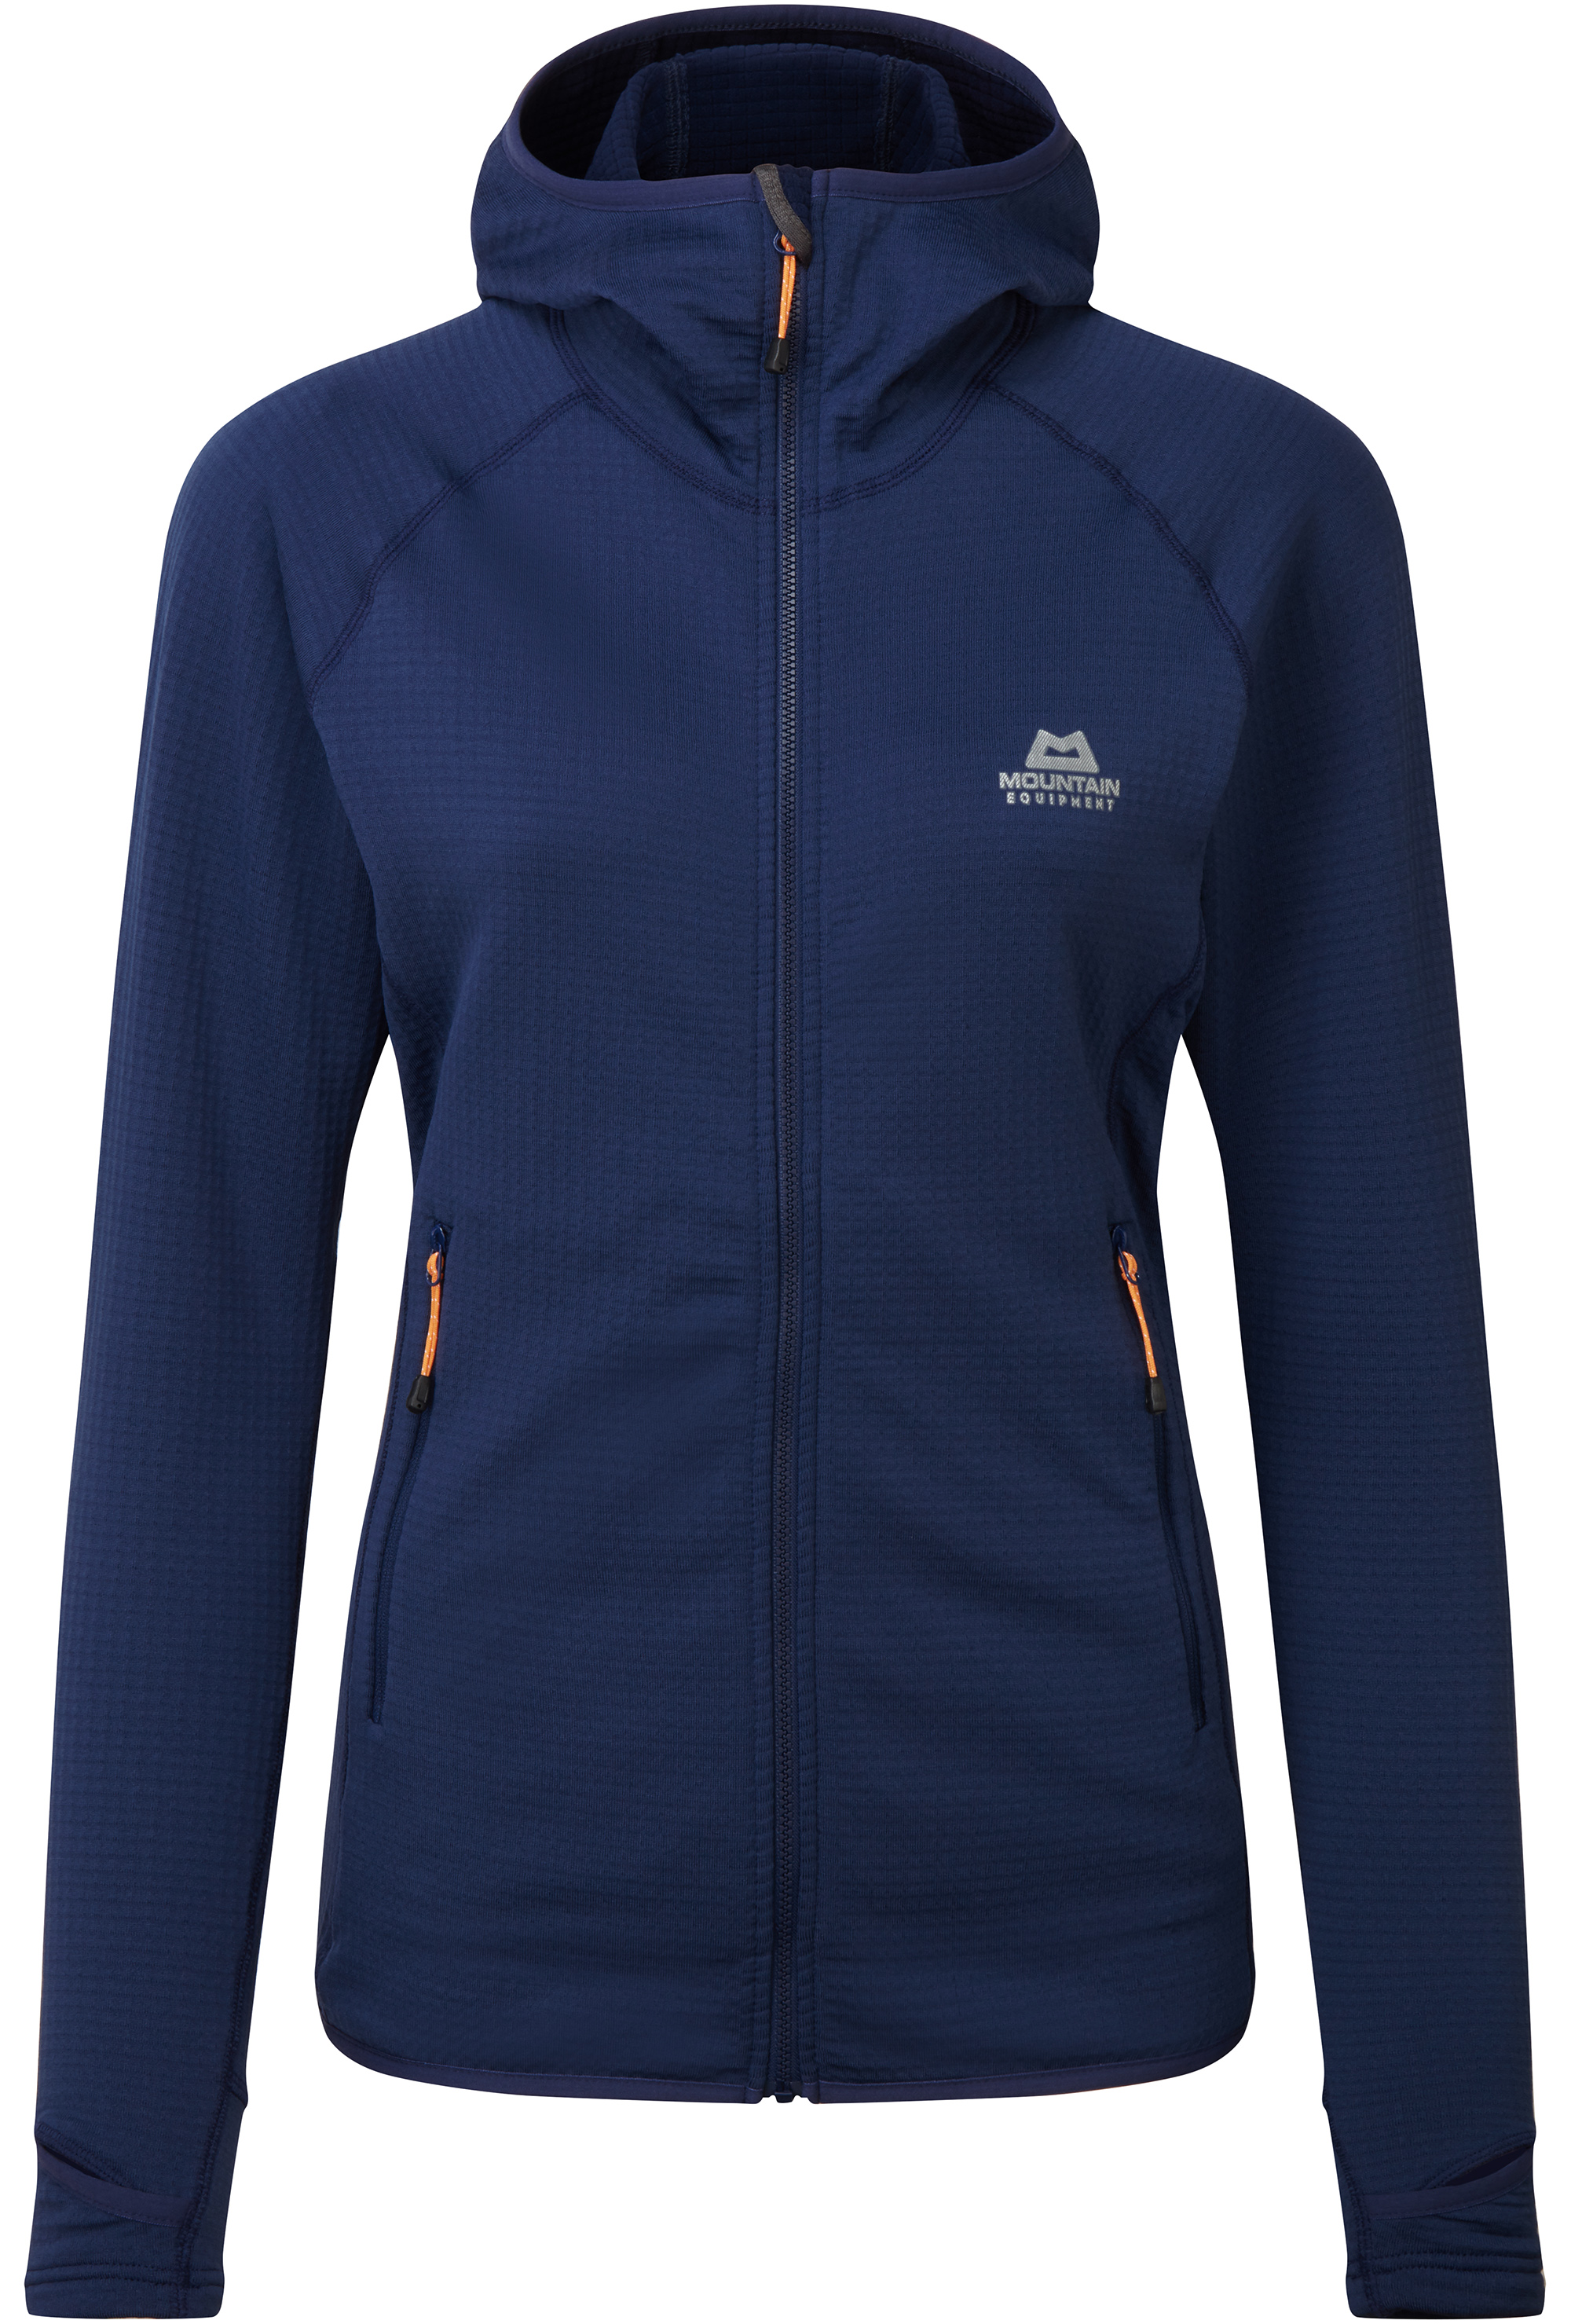 Mountain Equipment Eclipse Hooded Jacket Women'S Barva: Medieval Blue, Velikost: 8/XS